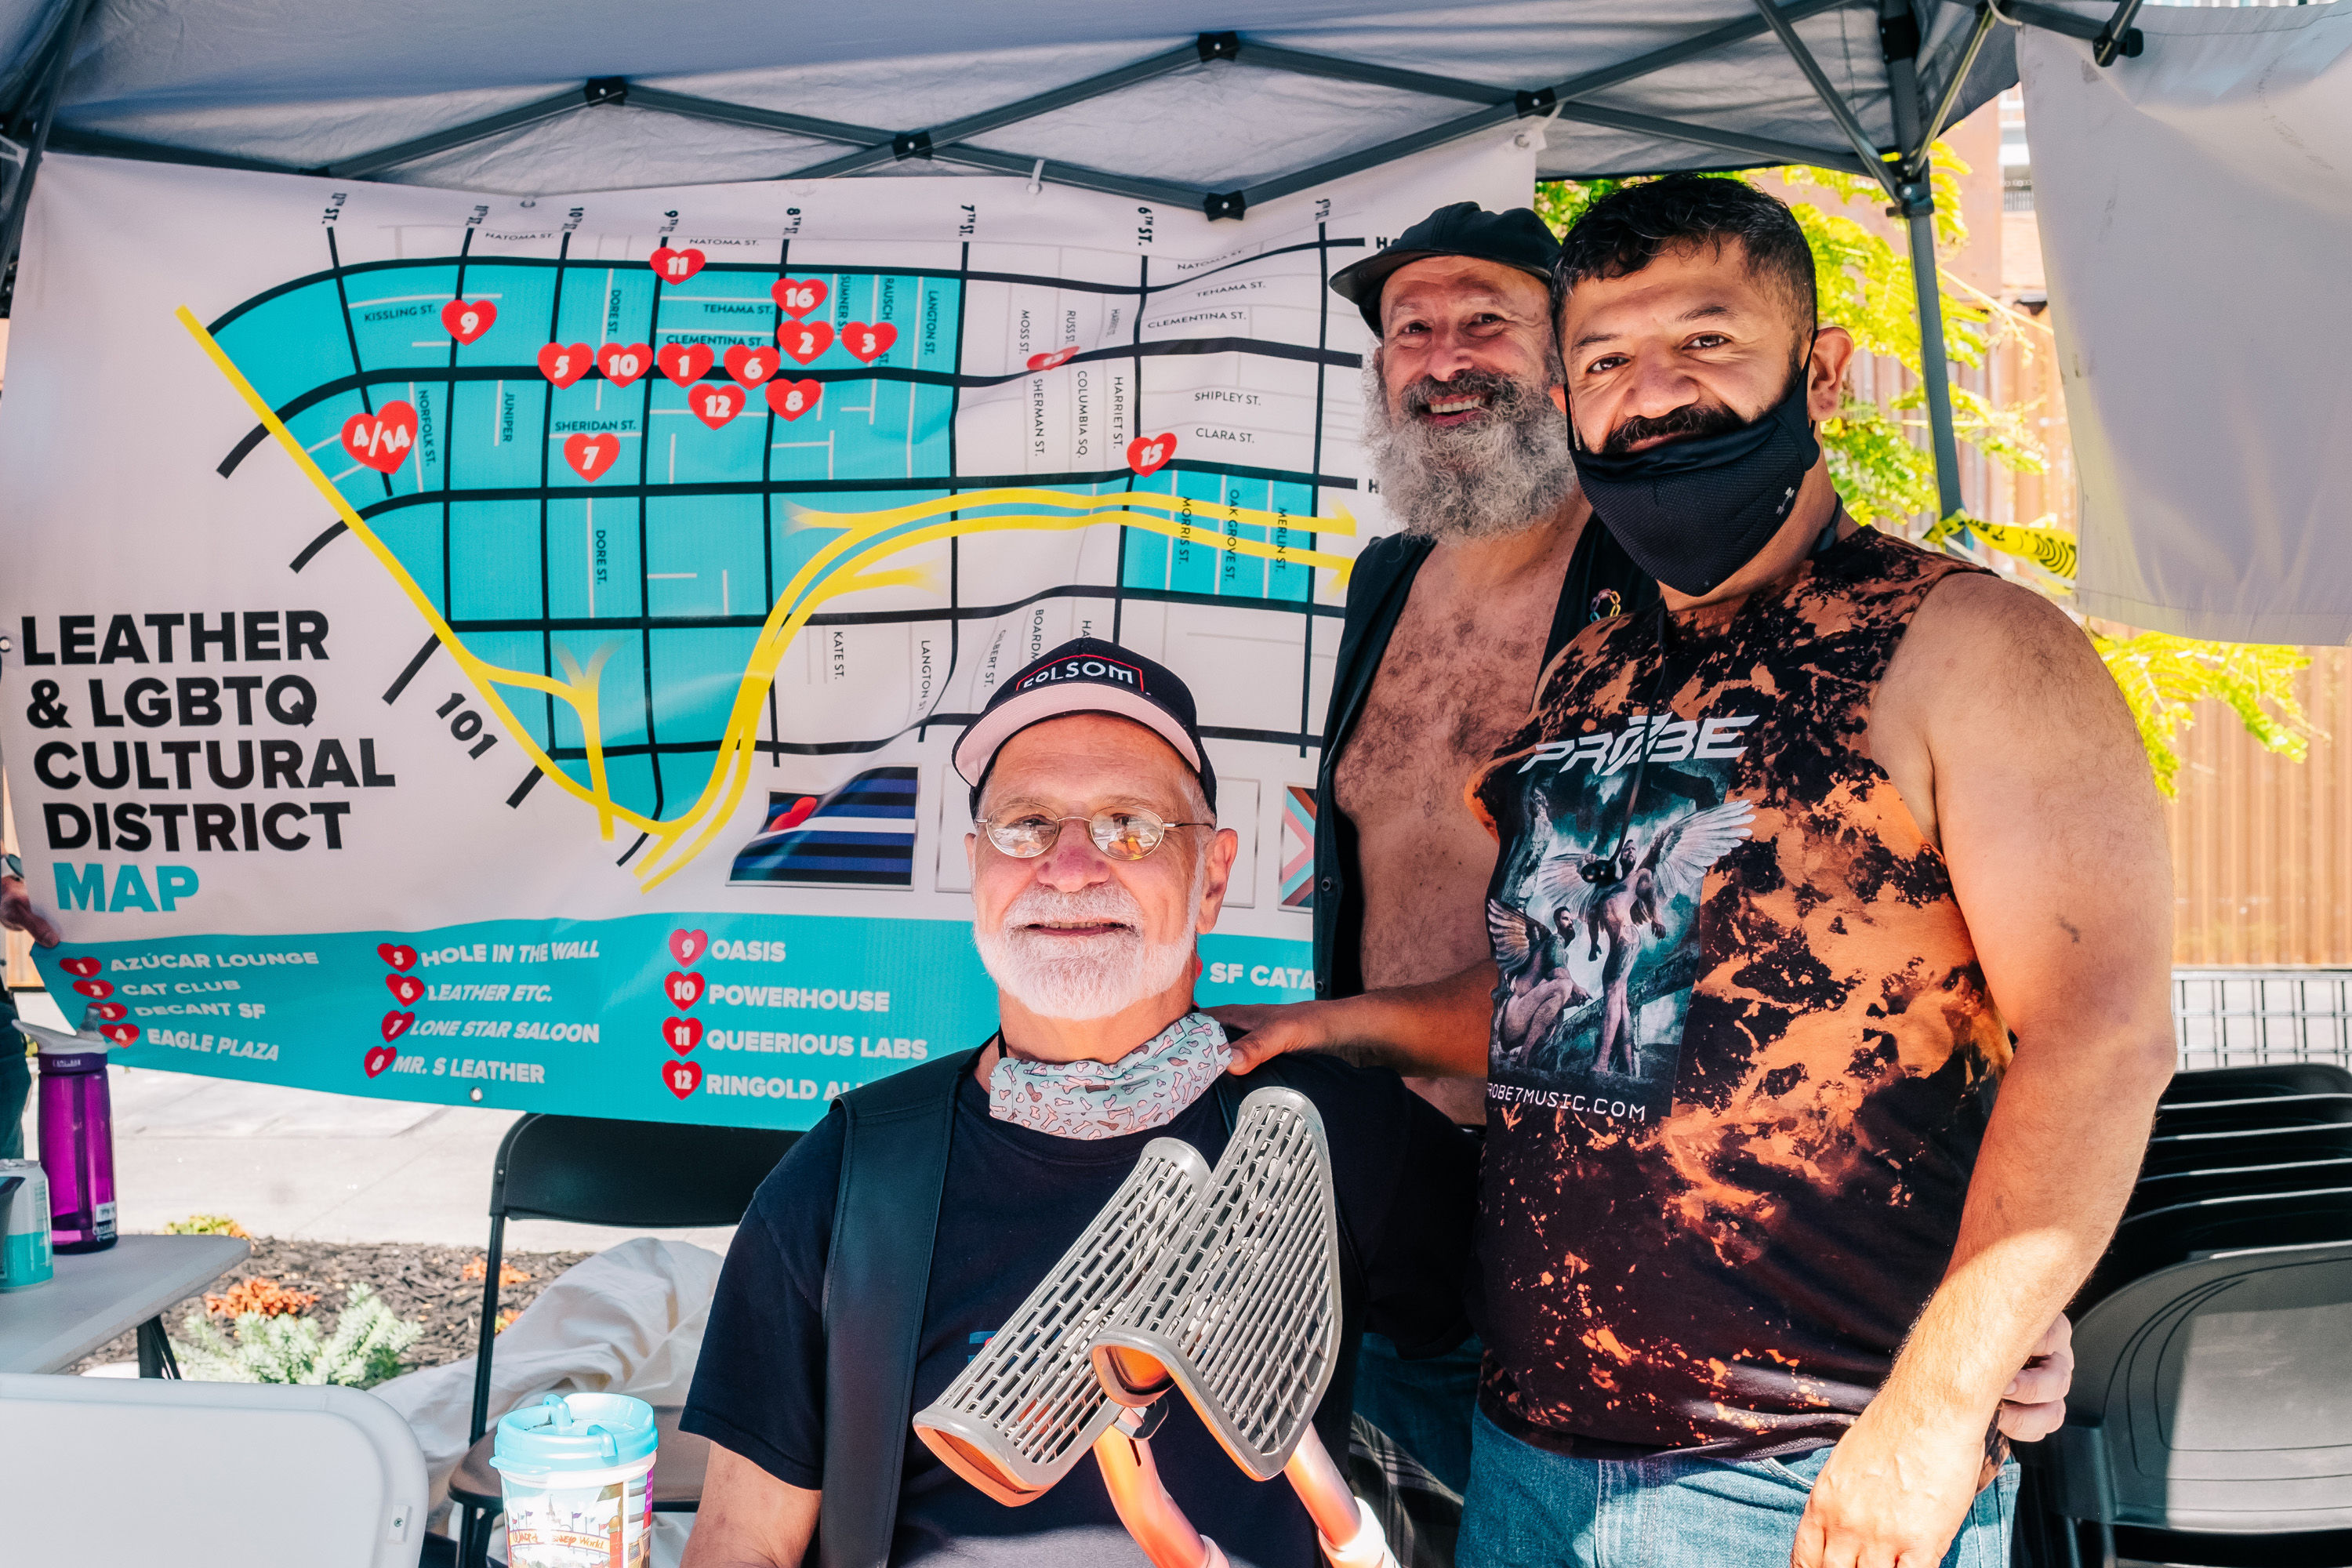 Three men from the Leather & LGBTQ Cultural District Representatives at their community booth during SOMA Second Saturdays. The Leather District map is in the background